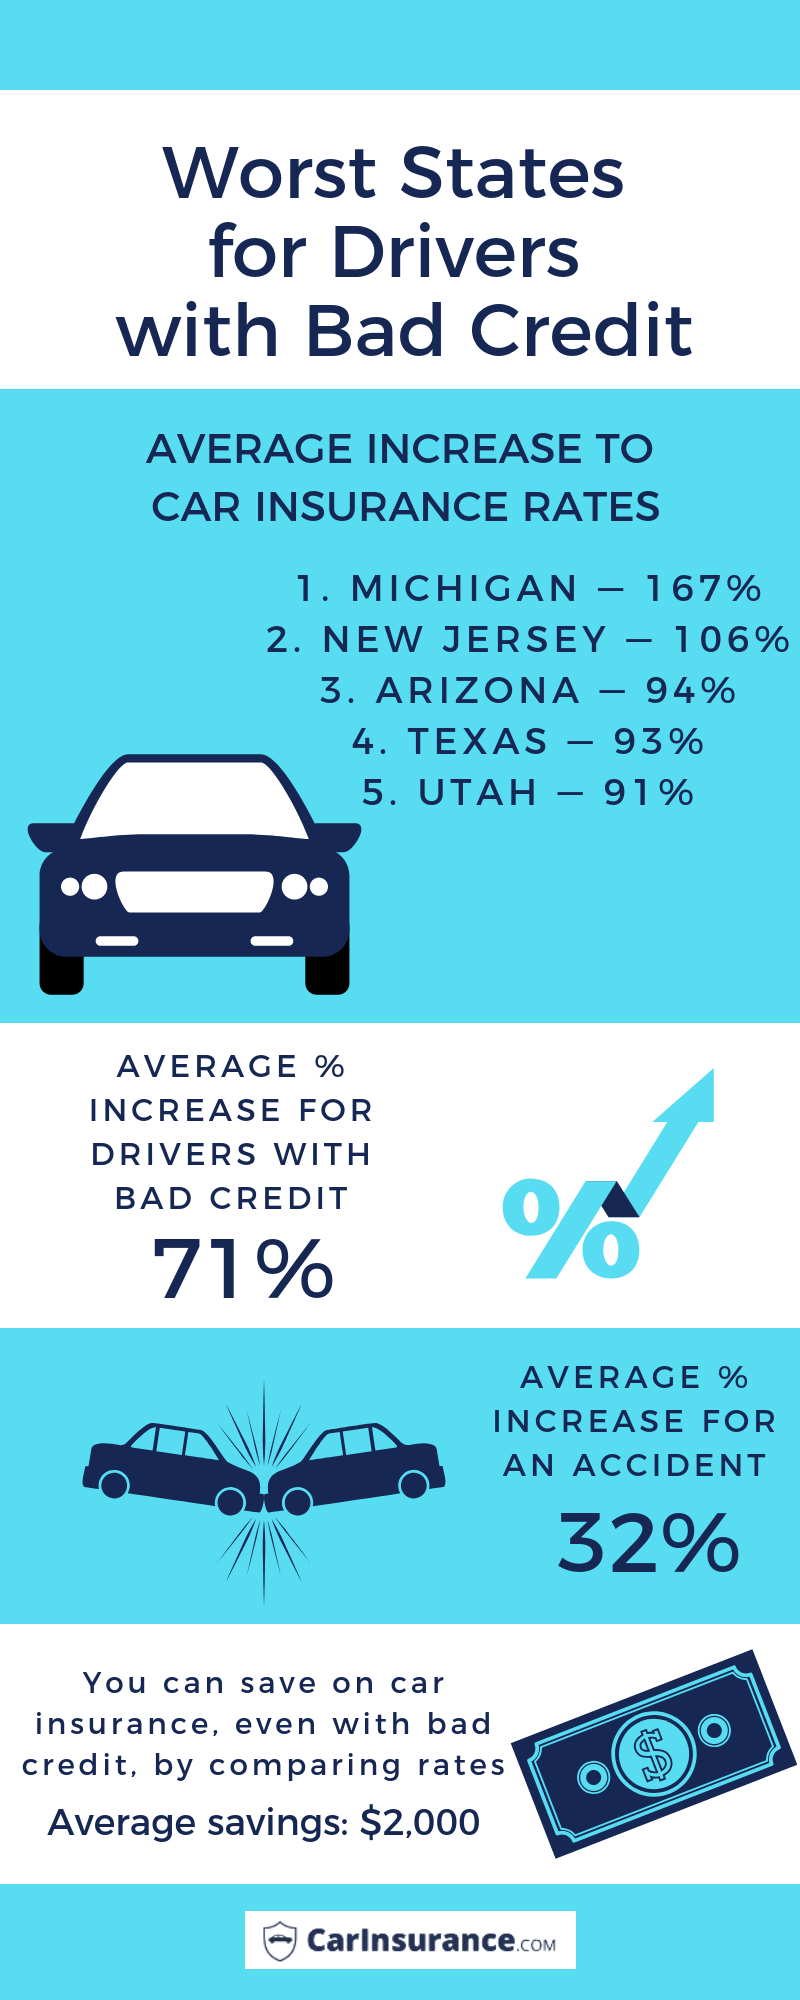 Worst states for drivers with bad credit, key data points